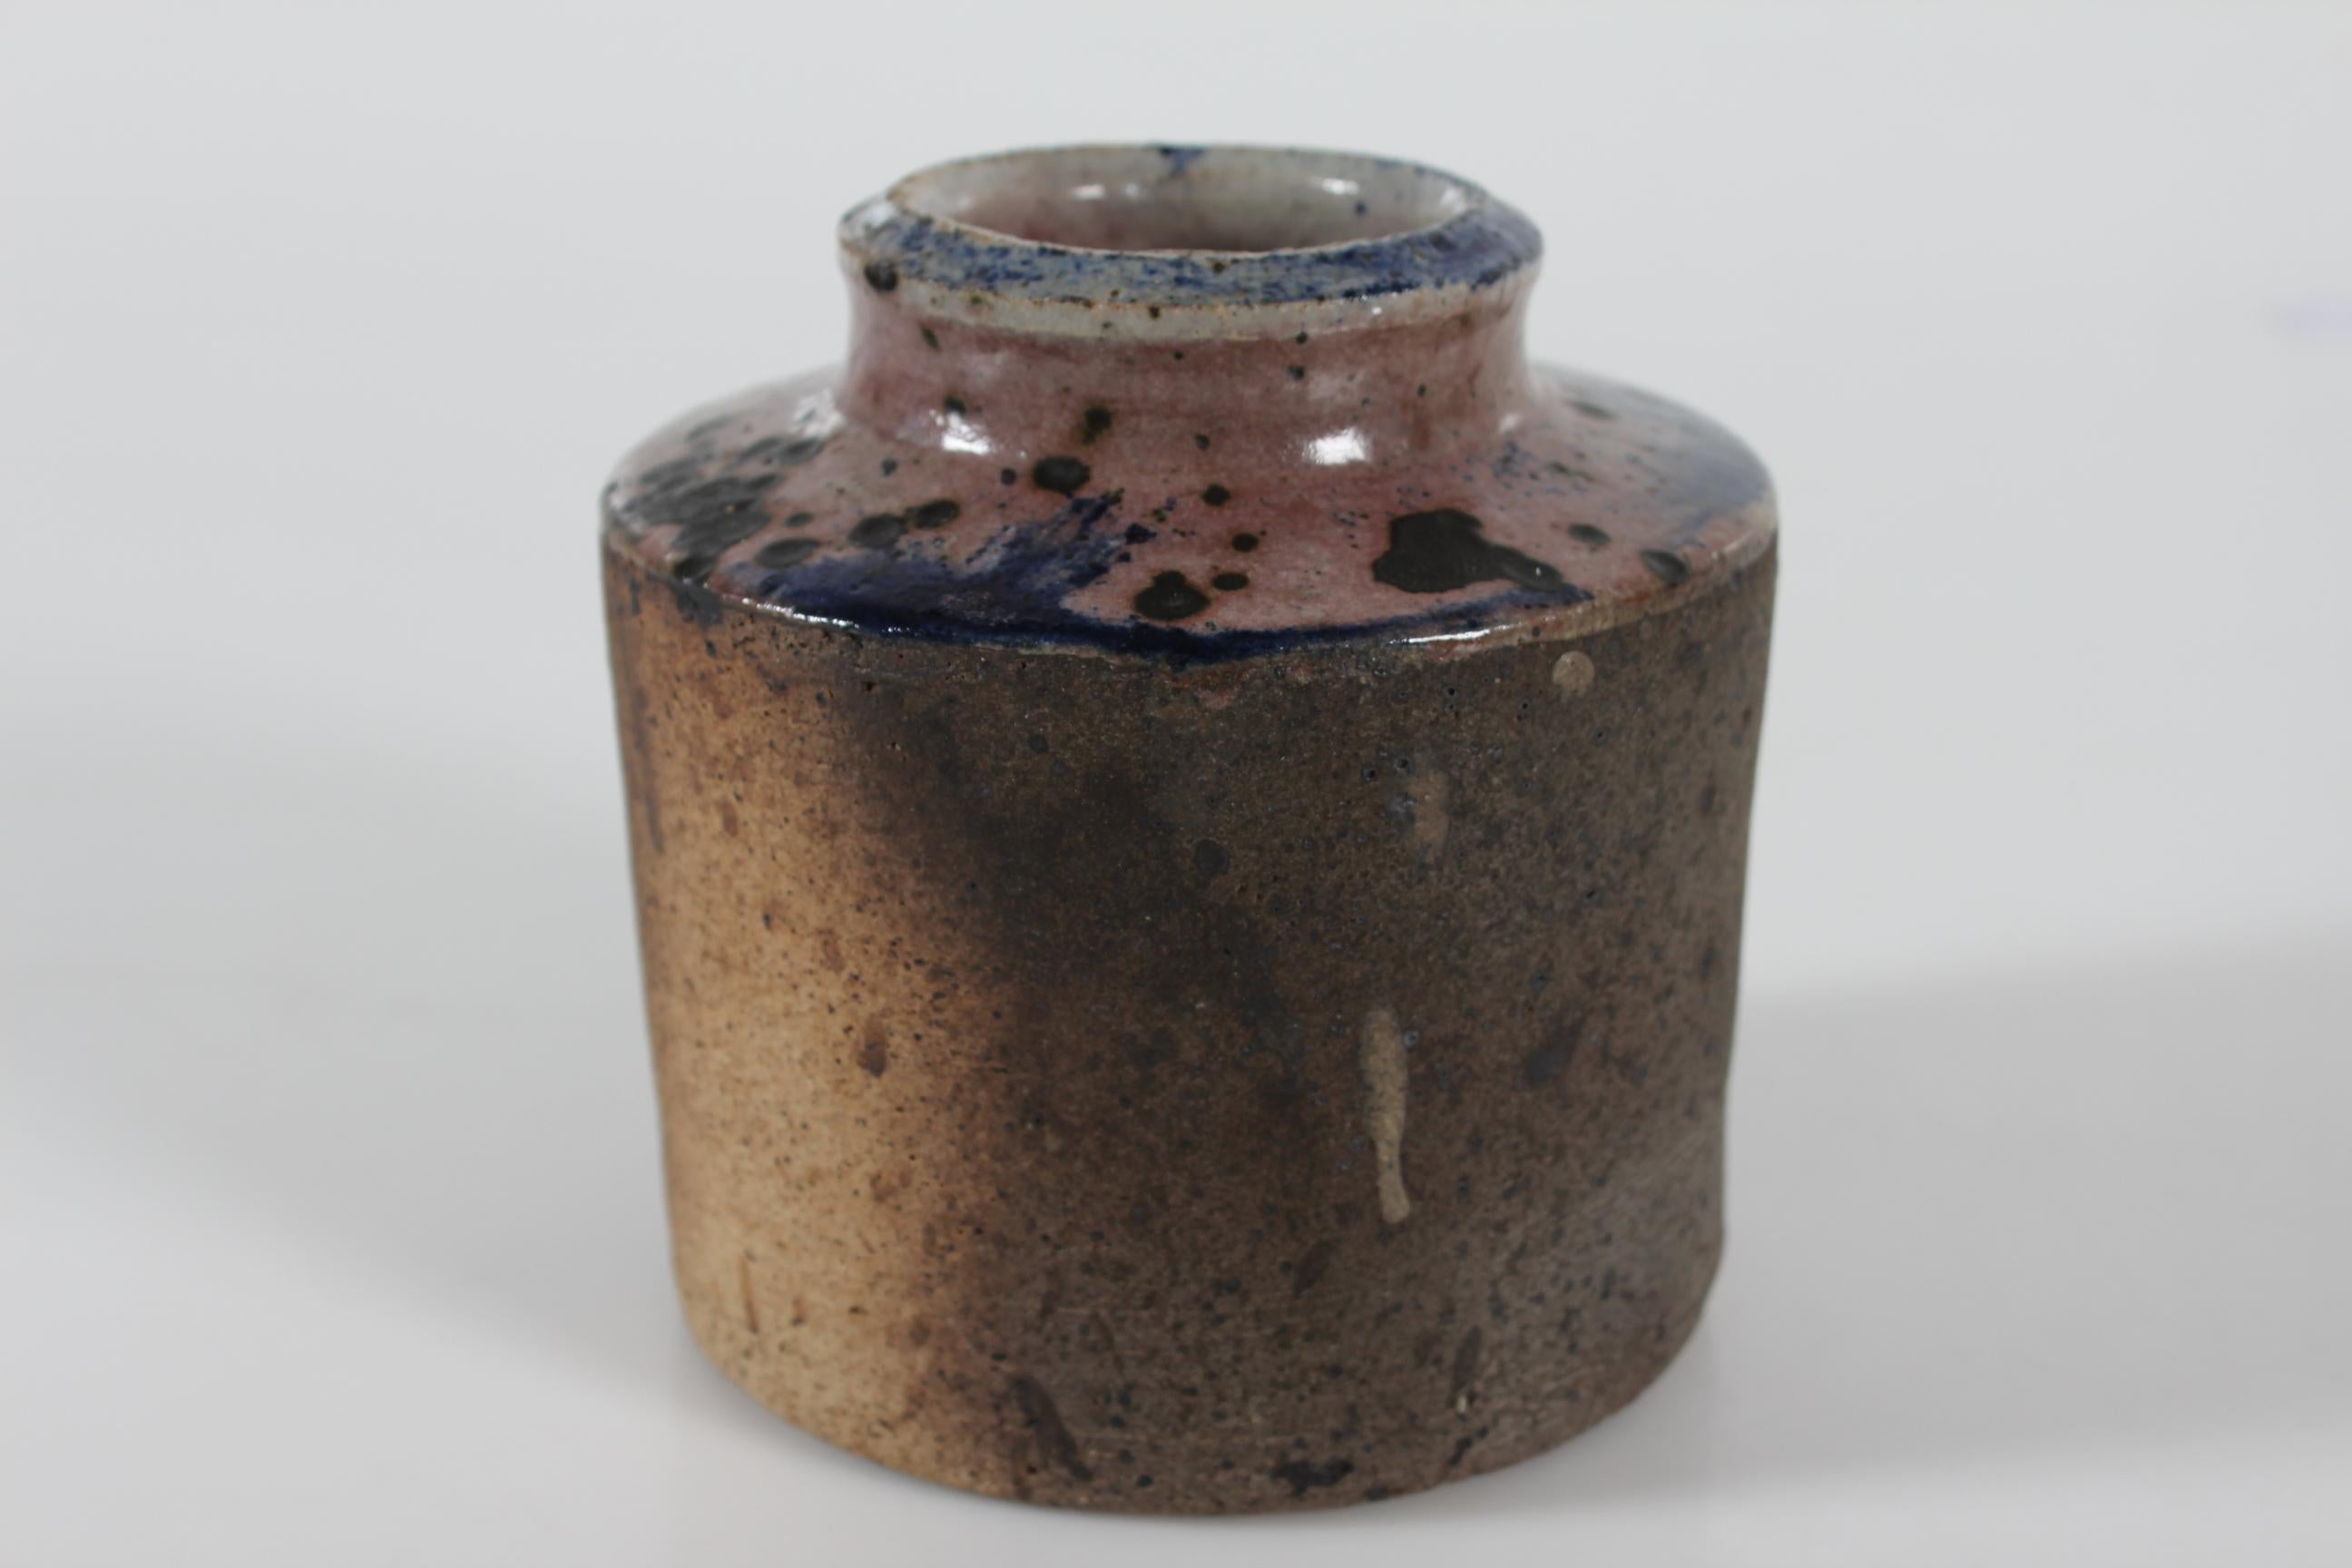 Mid-century stoneware vase by Danish ceramist Chris (Christian Verner) Moes (1914-1998). Made 1972.

The vase features an interesting both matte and glossy surface. The colors are grey, ochre brown and rose with speckles of purple and black. The